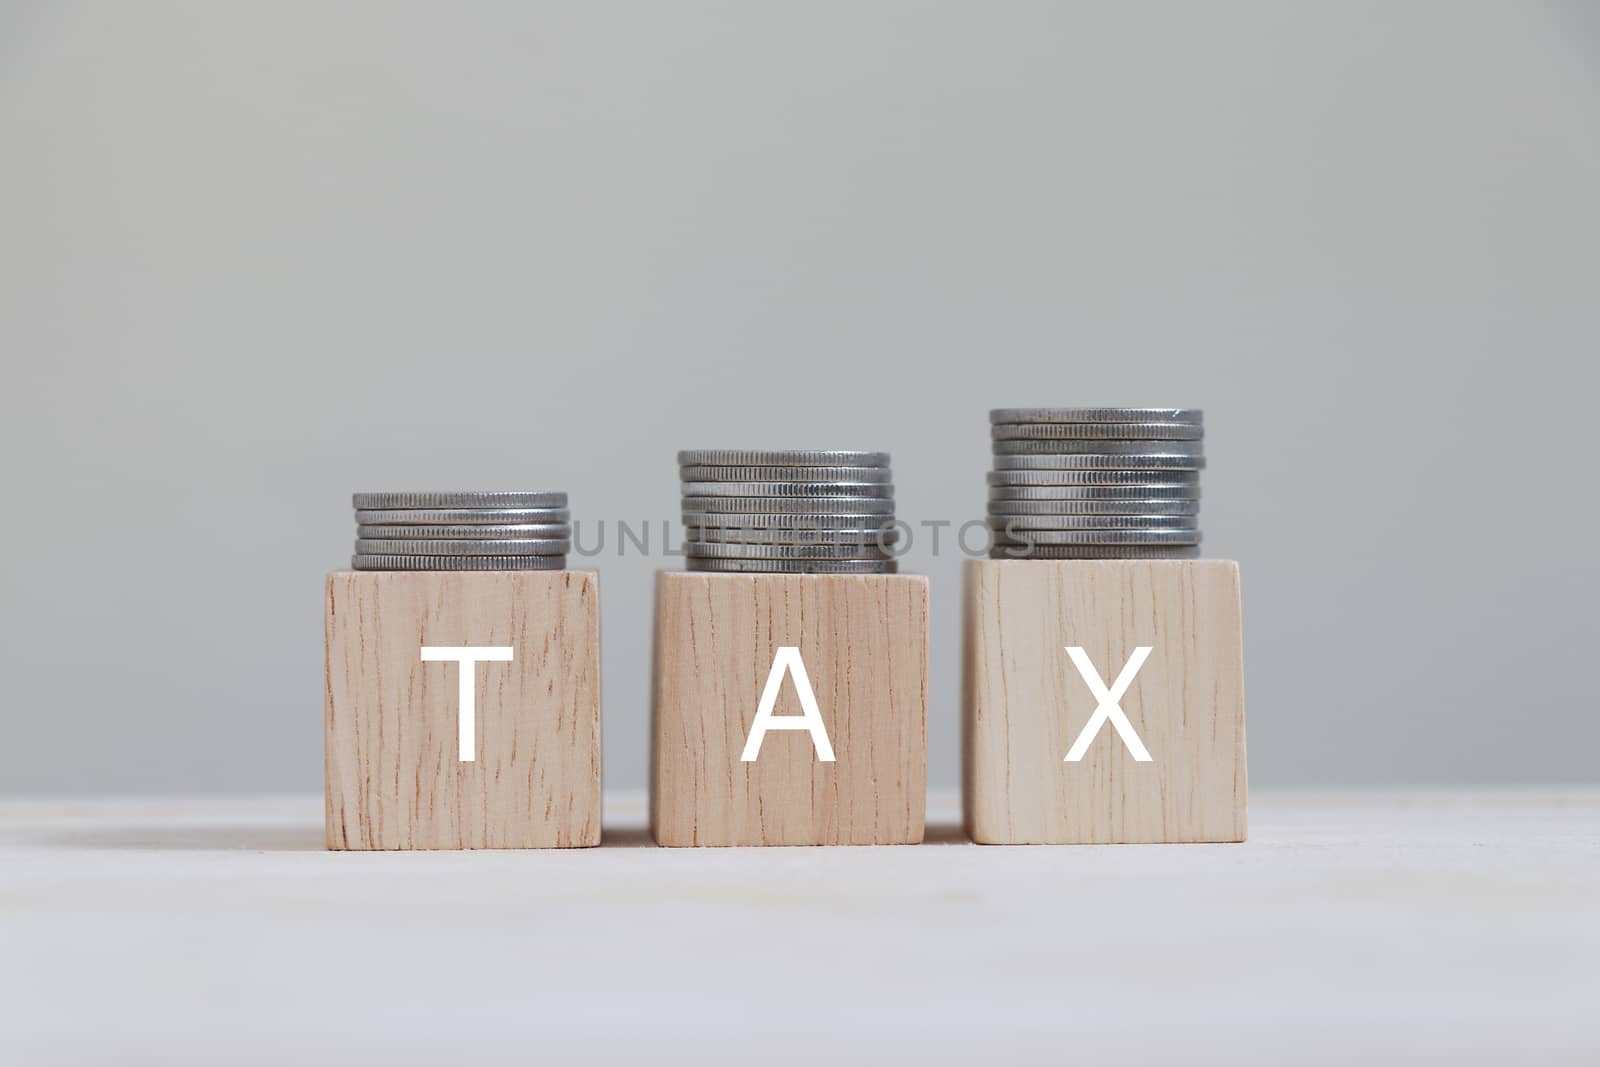 Tax with coins arranged in bar graphs on top.